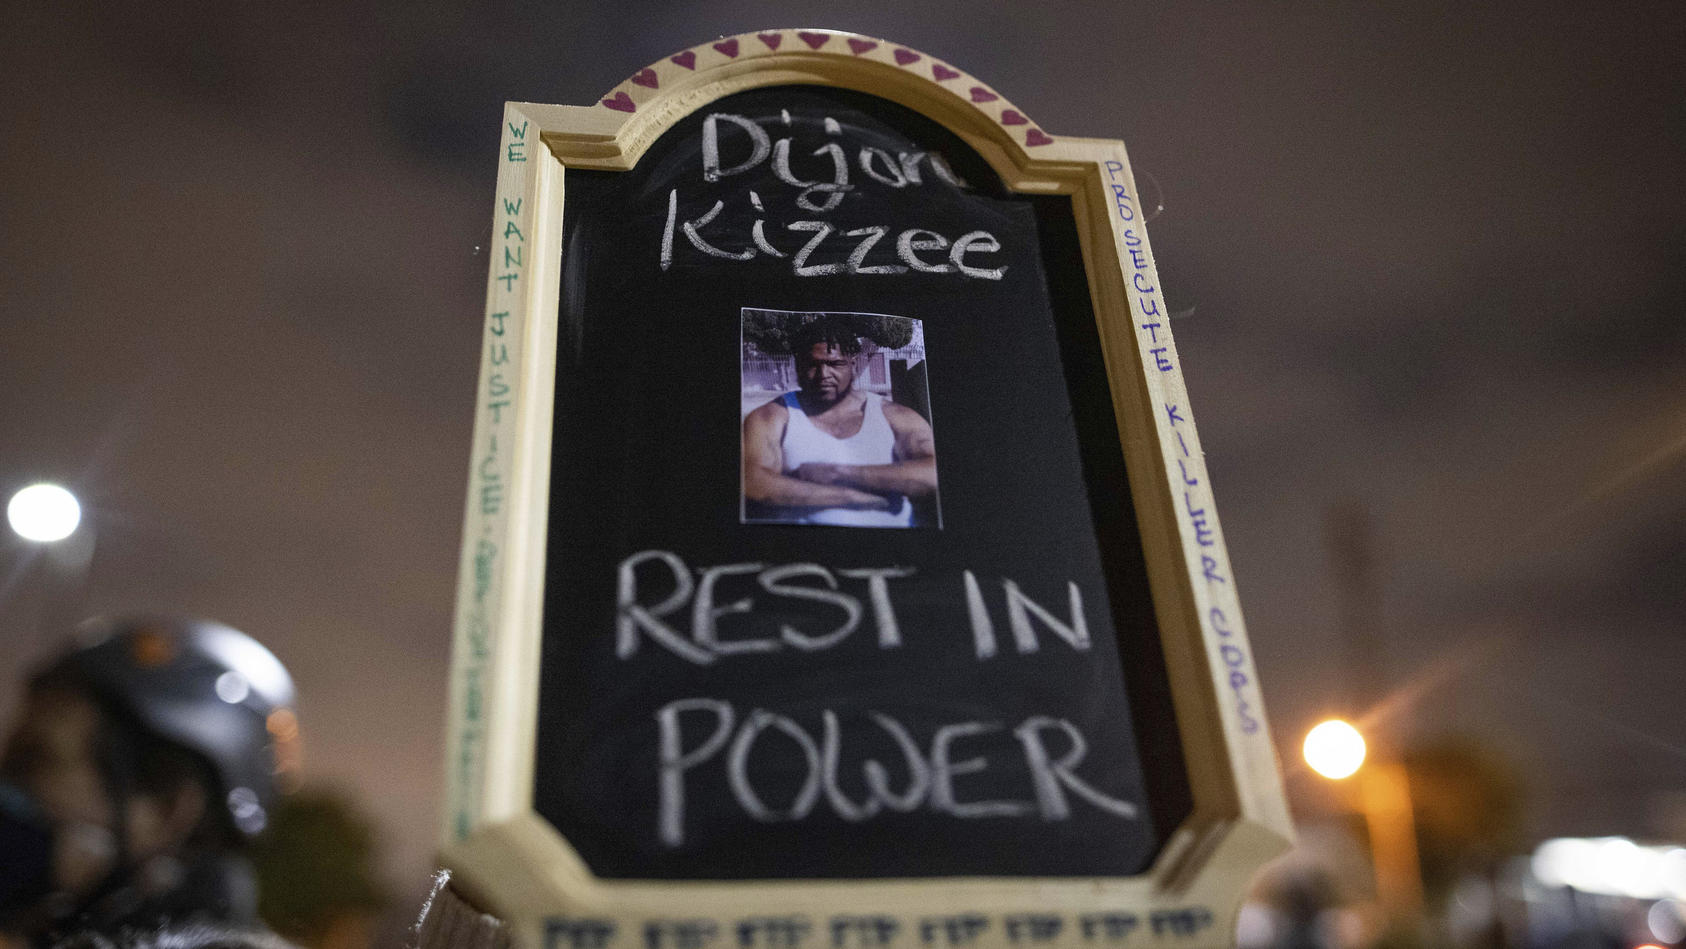 A protester holds a sign with a picture of Dijon Kizzee, who died after being shot by deputies of the Los Angeles Sheriff's Department on Monday, Aug. 31, 2020, in Los Angeles, Calif. (AP Photo/Christian Monterrosa)